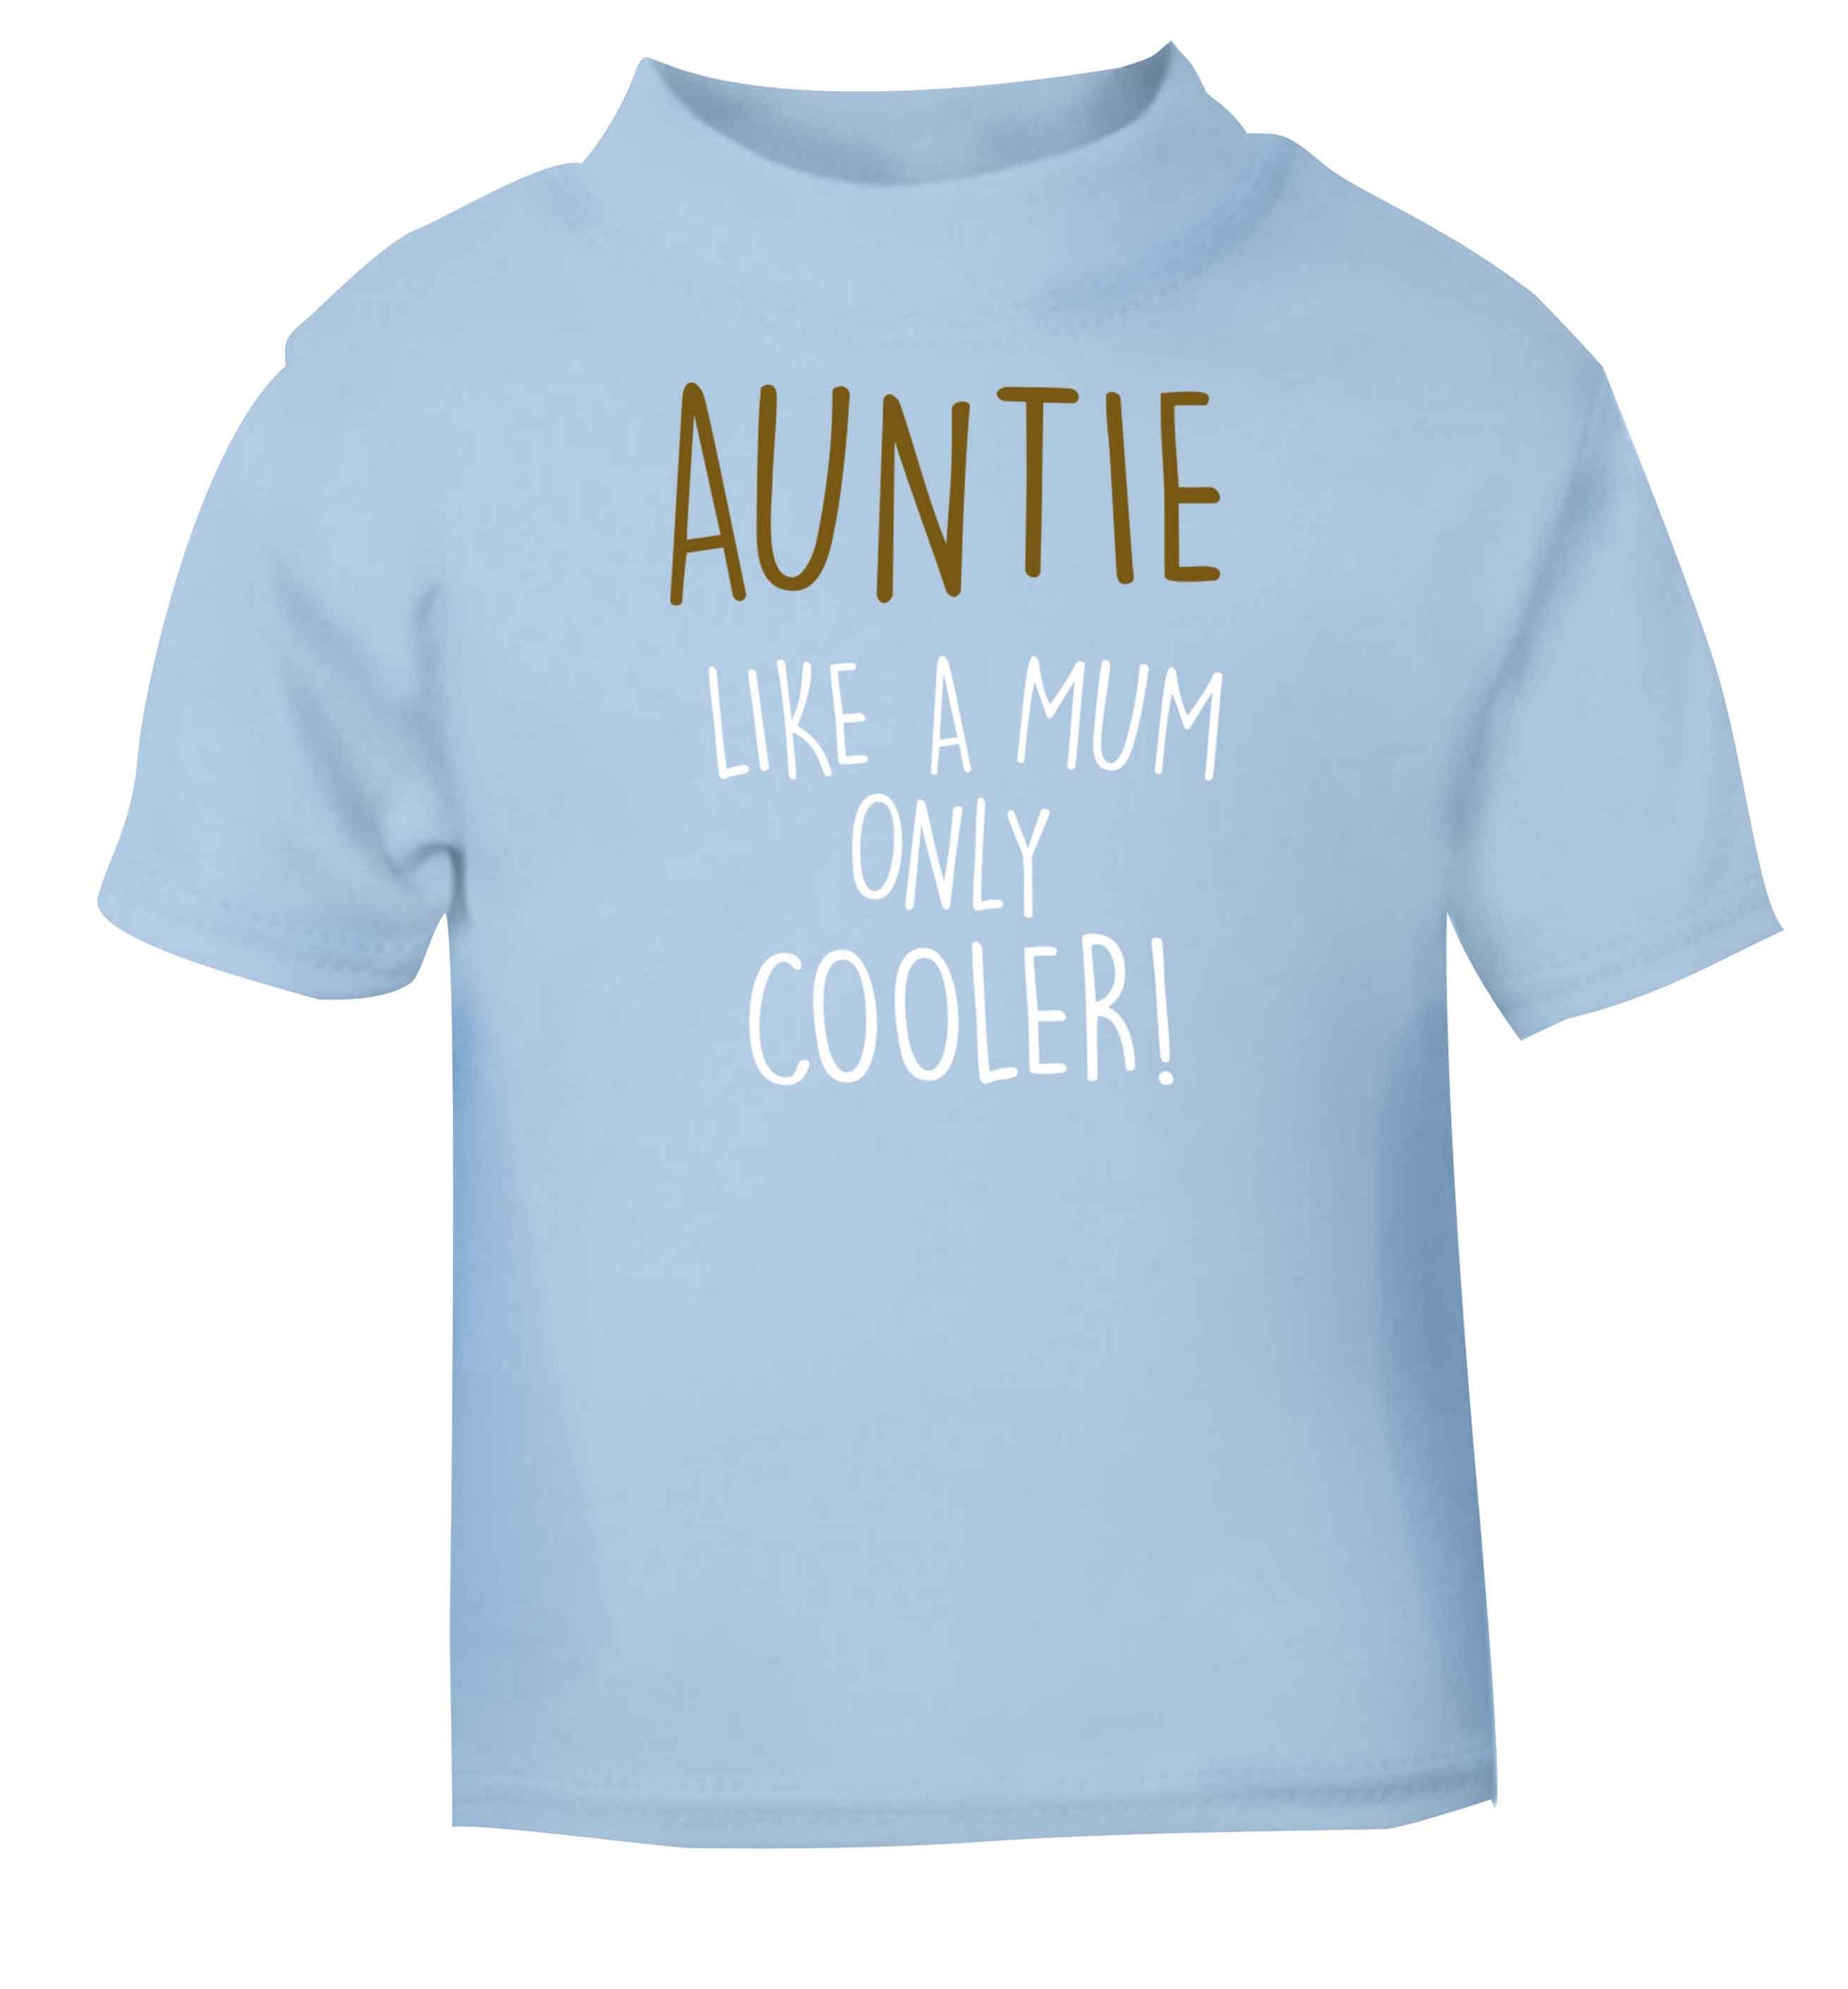 Auntie like a mum only cooler light blue baby toddler Tshirt 2 Years